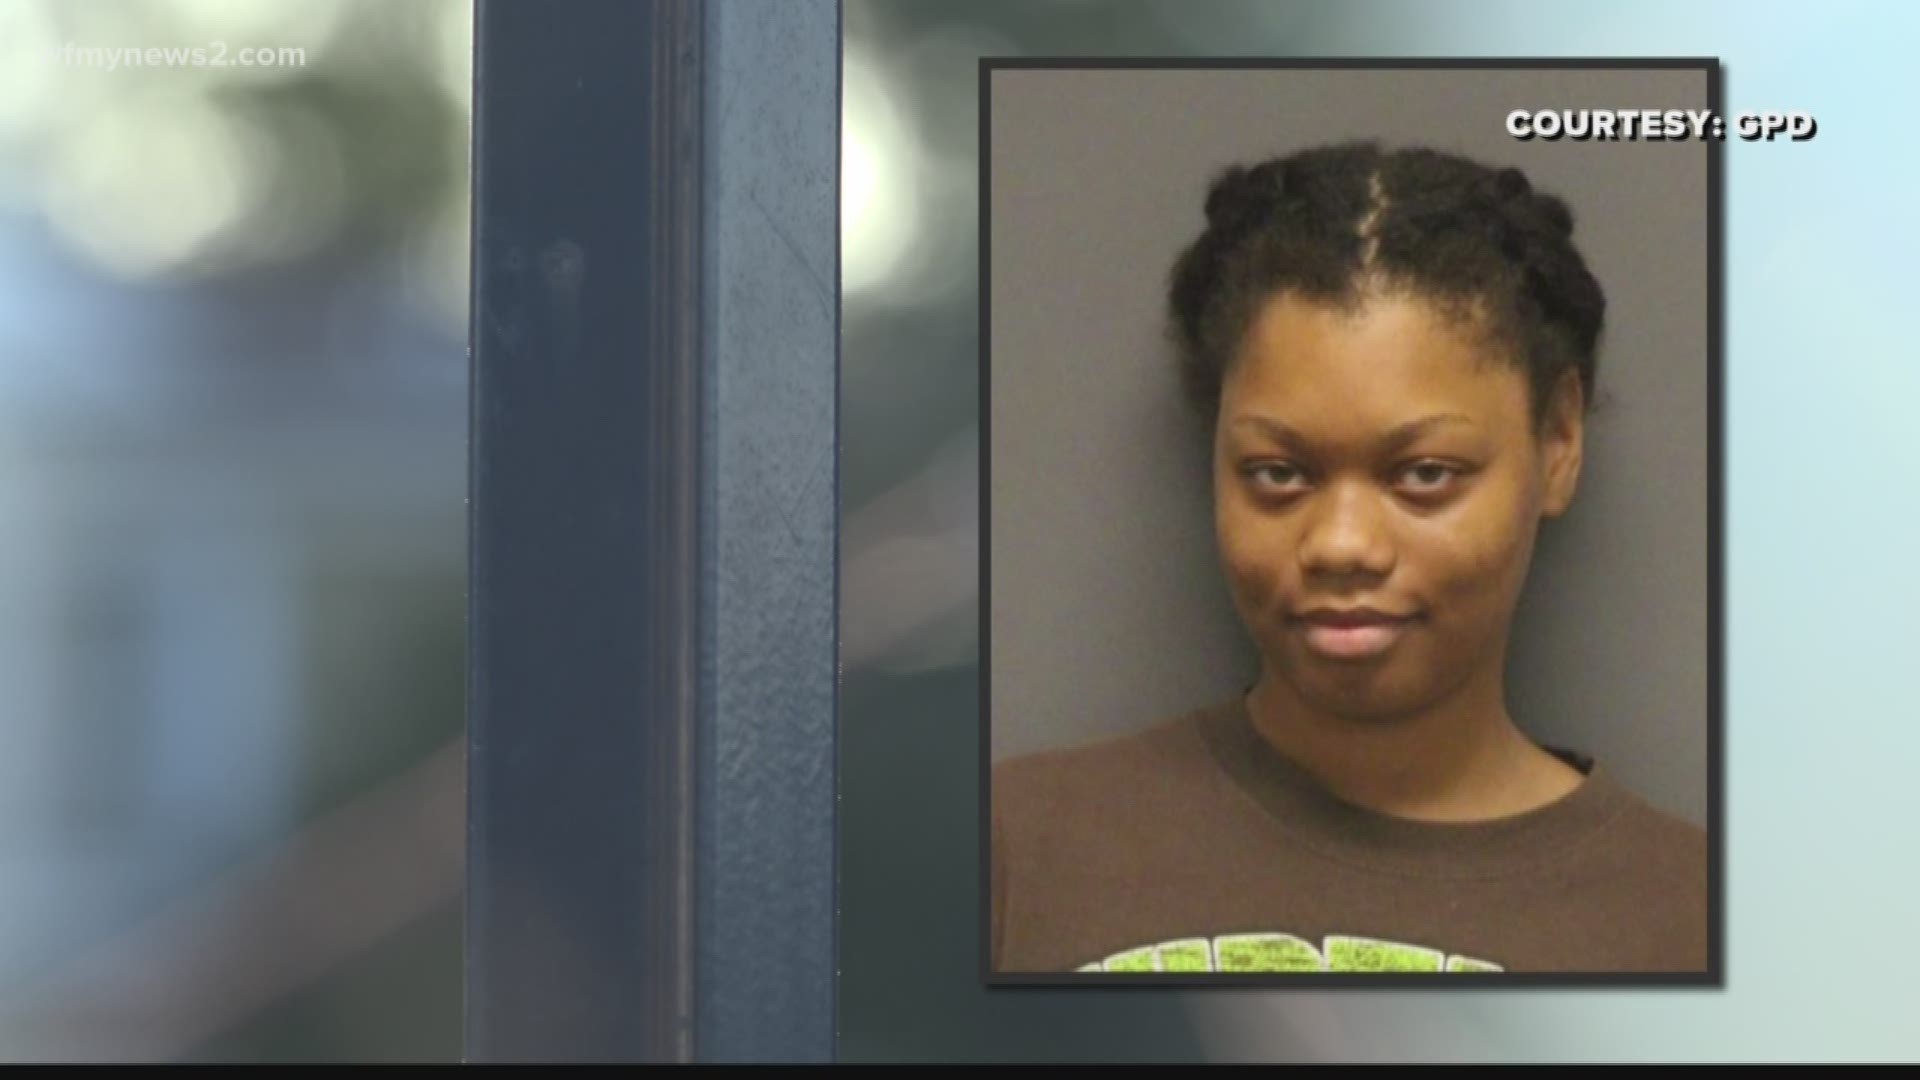 Prosecutors say N'denezsia Lancaster has been charged with Second-Degree Kidnapping in addition to her current kidnapping charge.